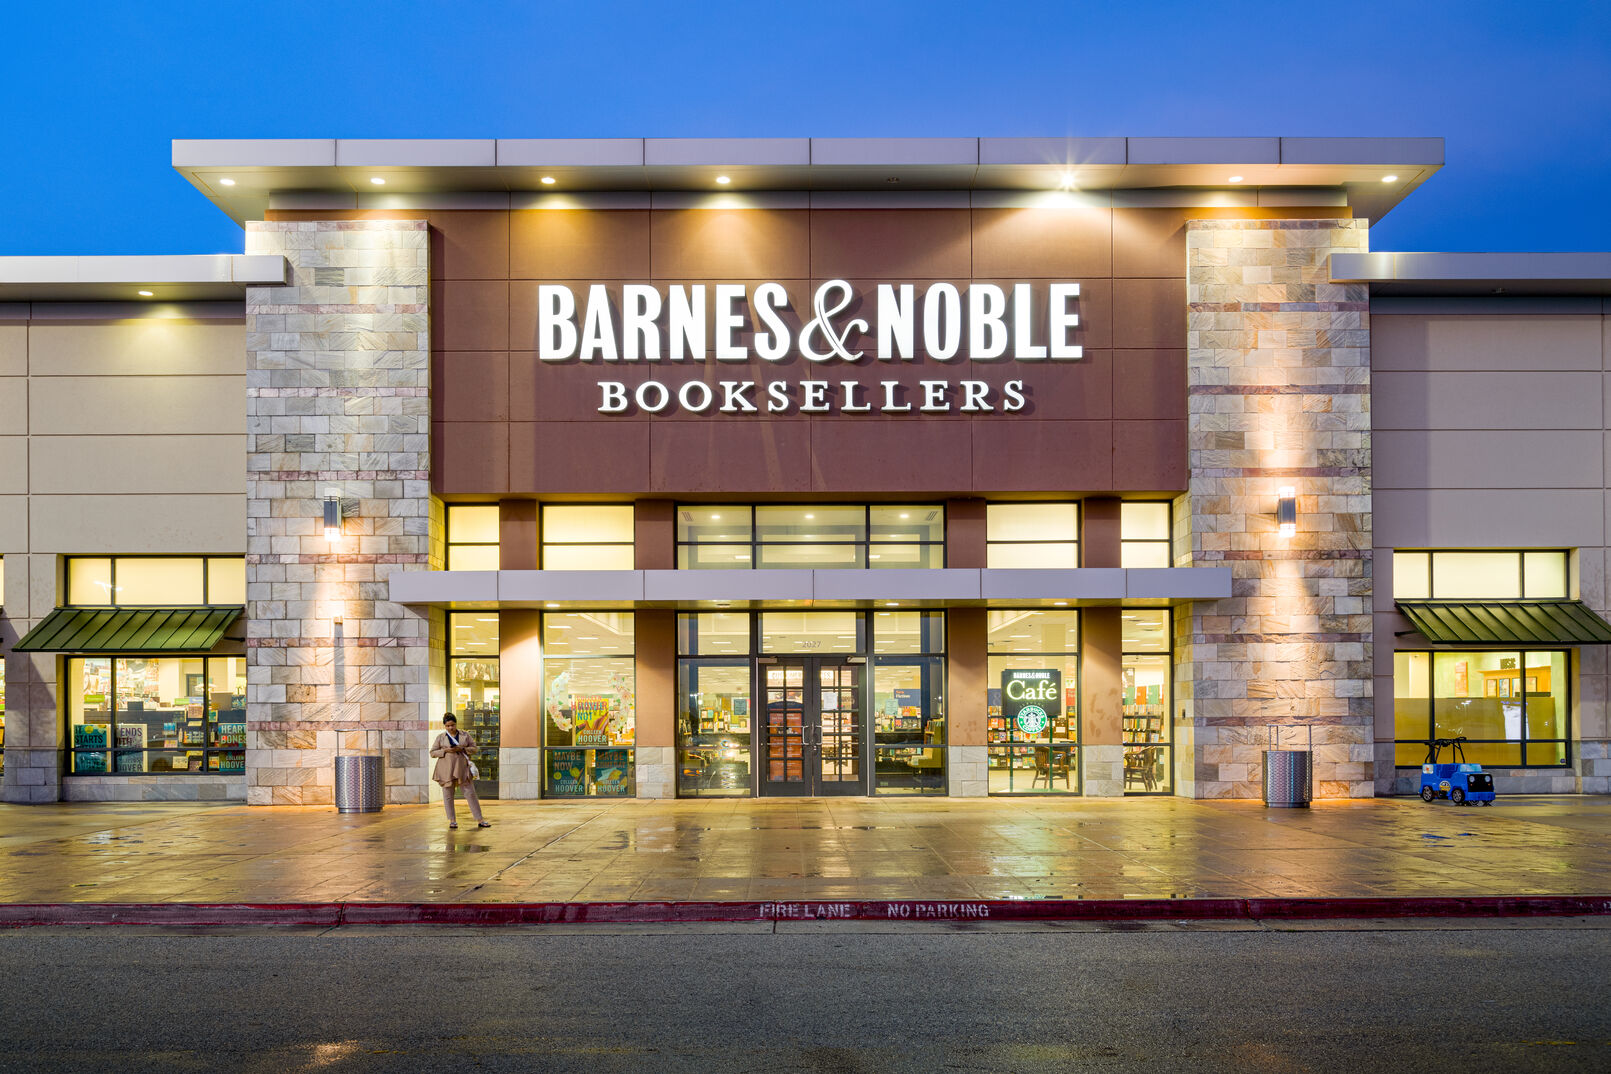 Exterior storefront of Barnes and Noble